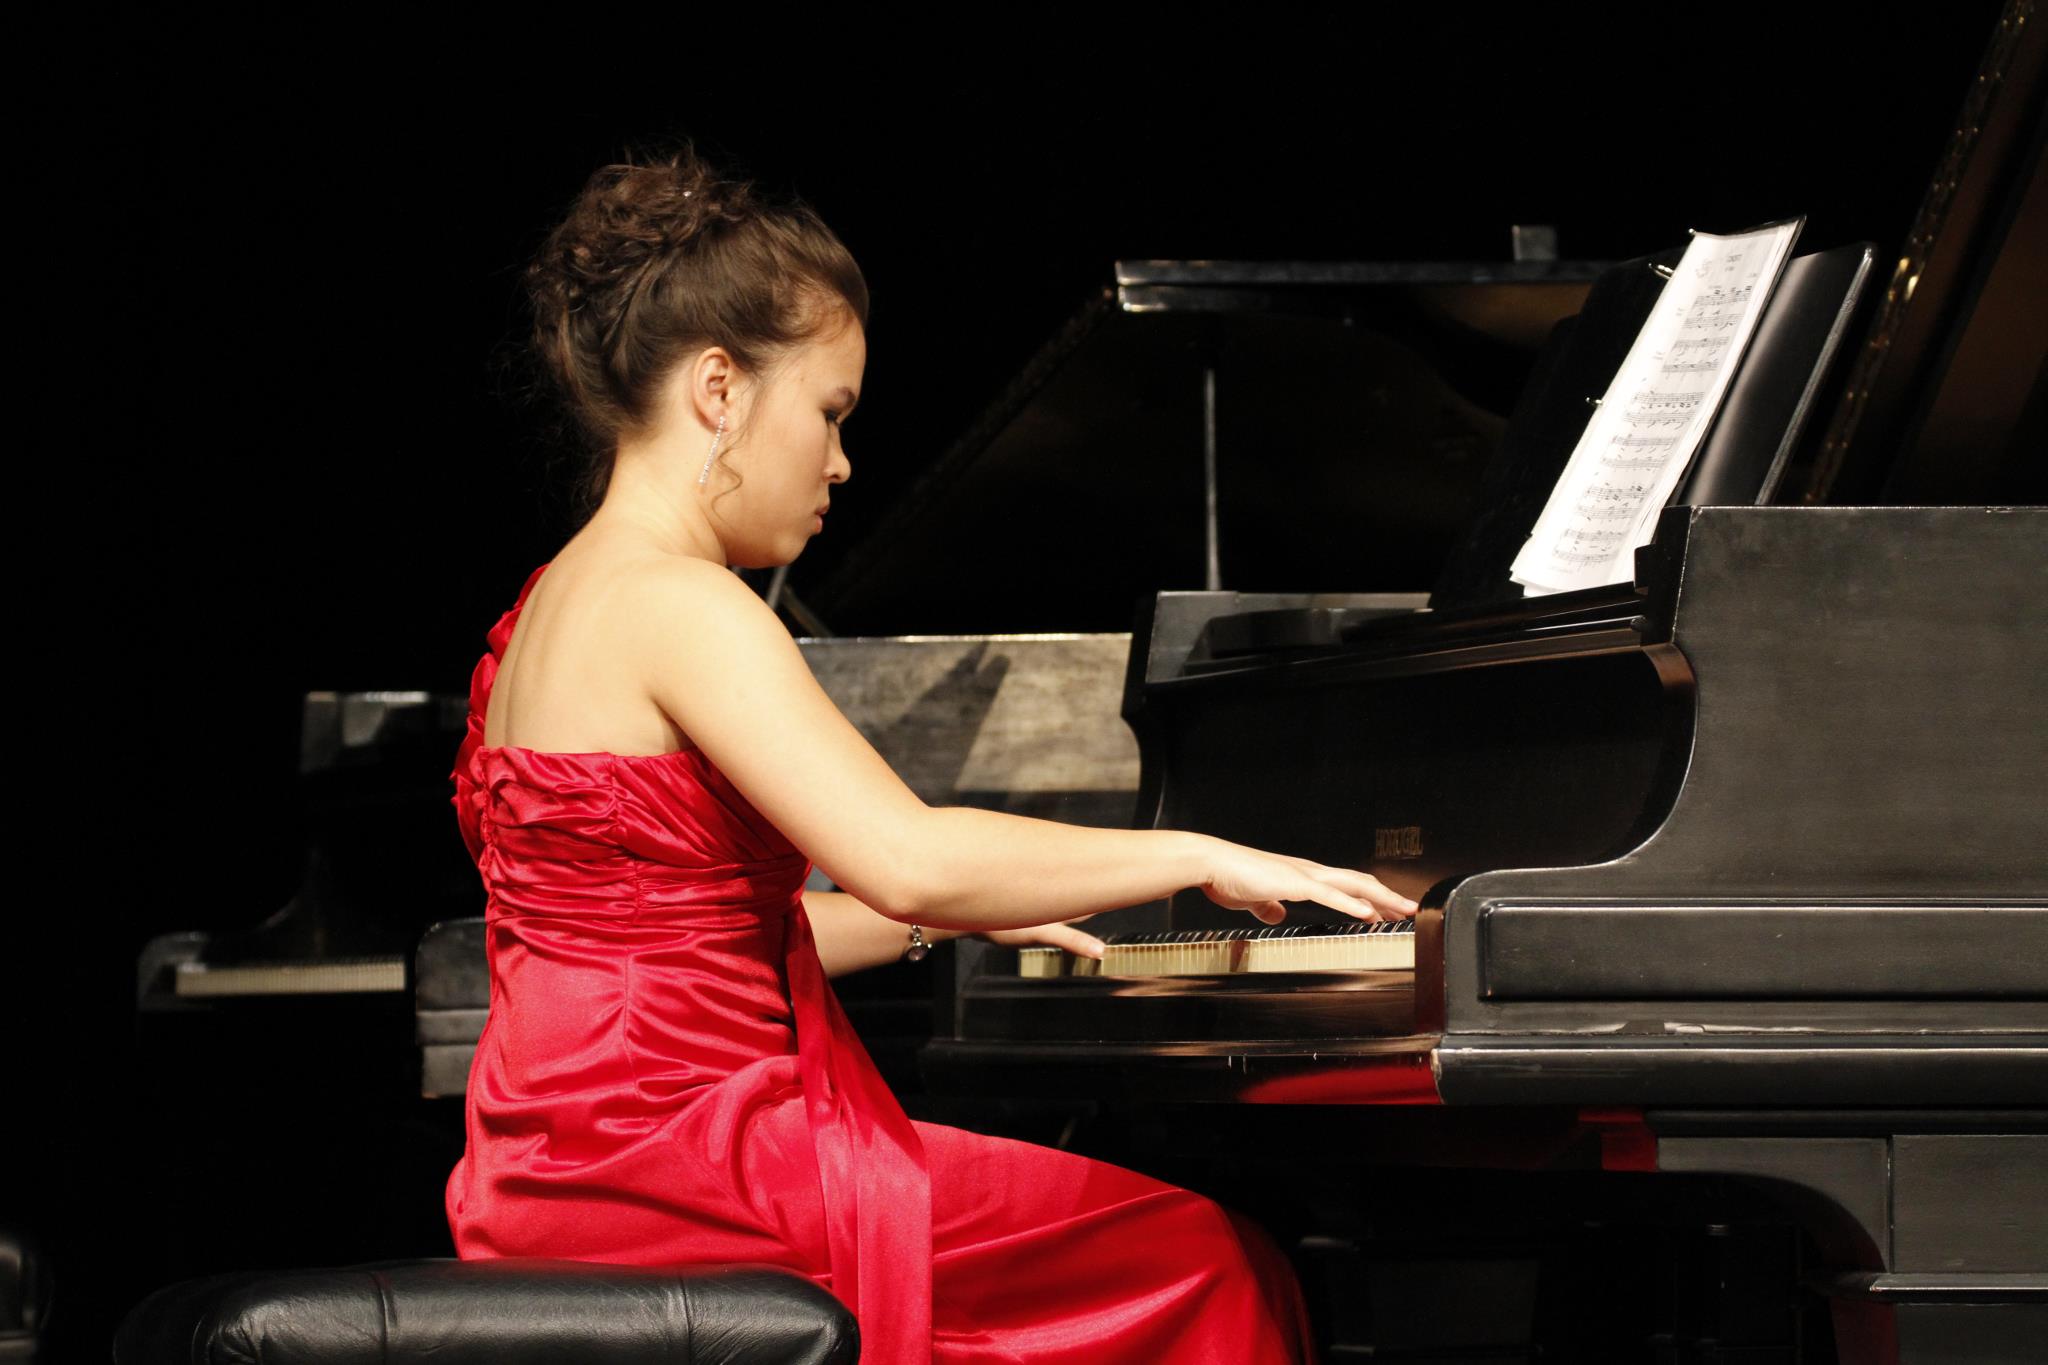 Abby Edwards sitting at a piano in a red dress performing at her senior recital.